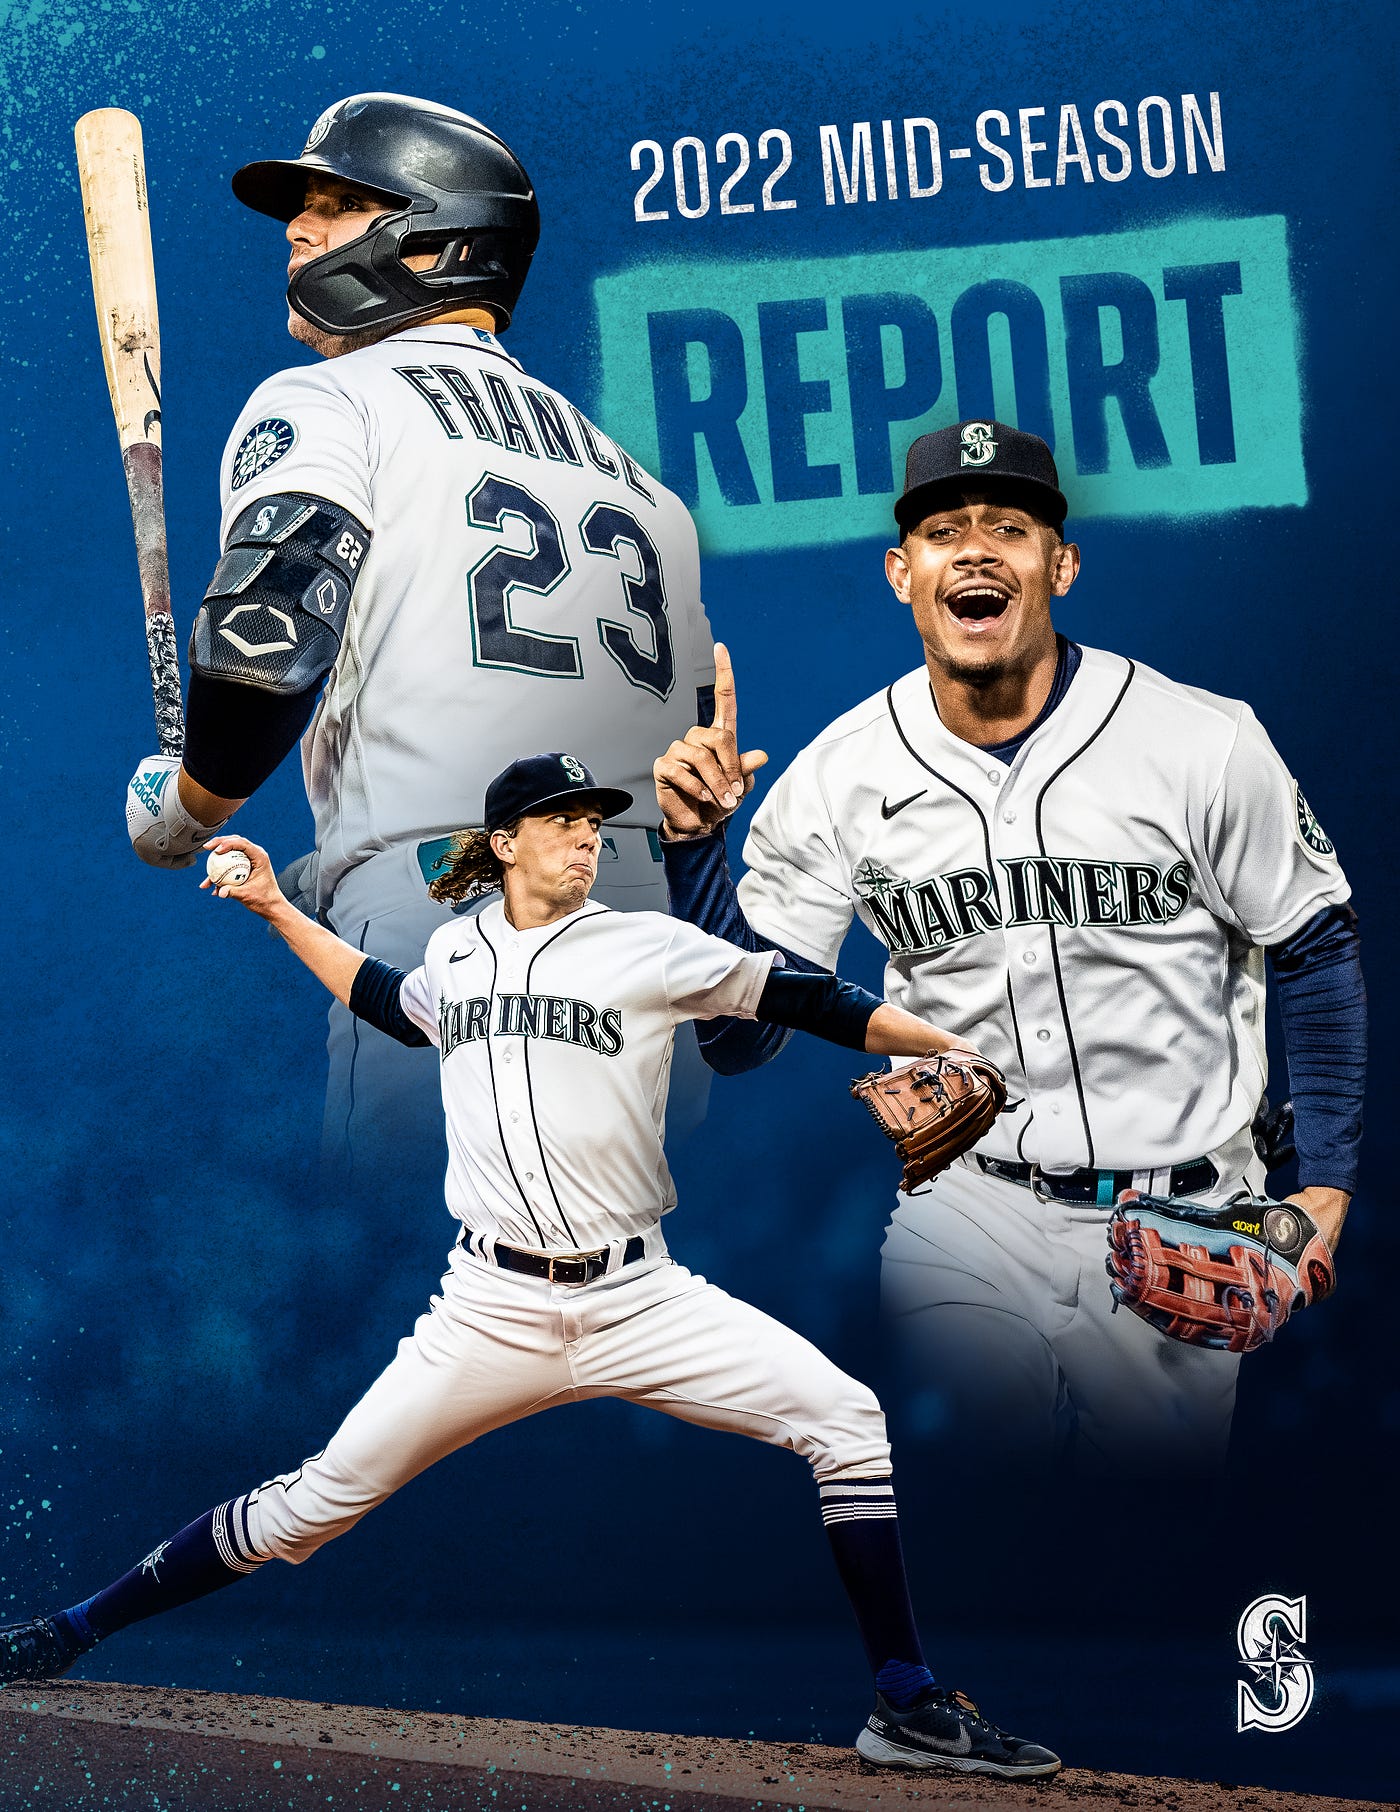 2022 Mariners MidSeason Report. THE RECORD…the Mariners finished the